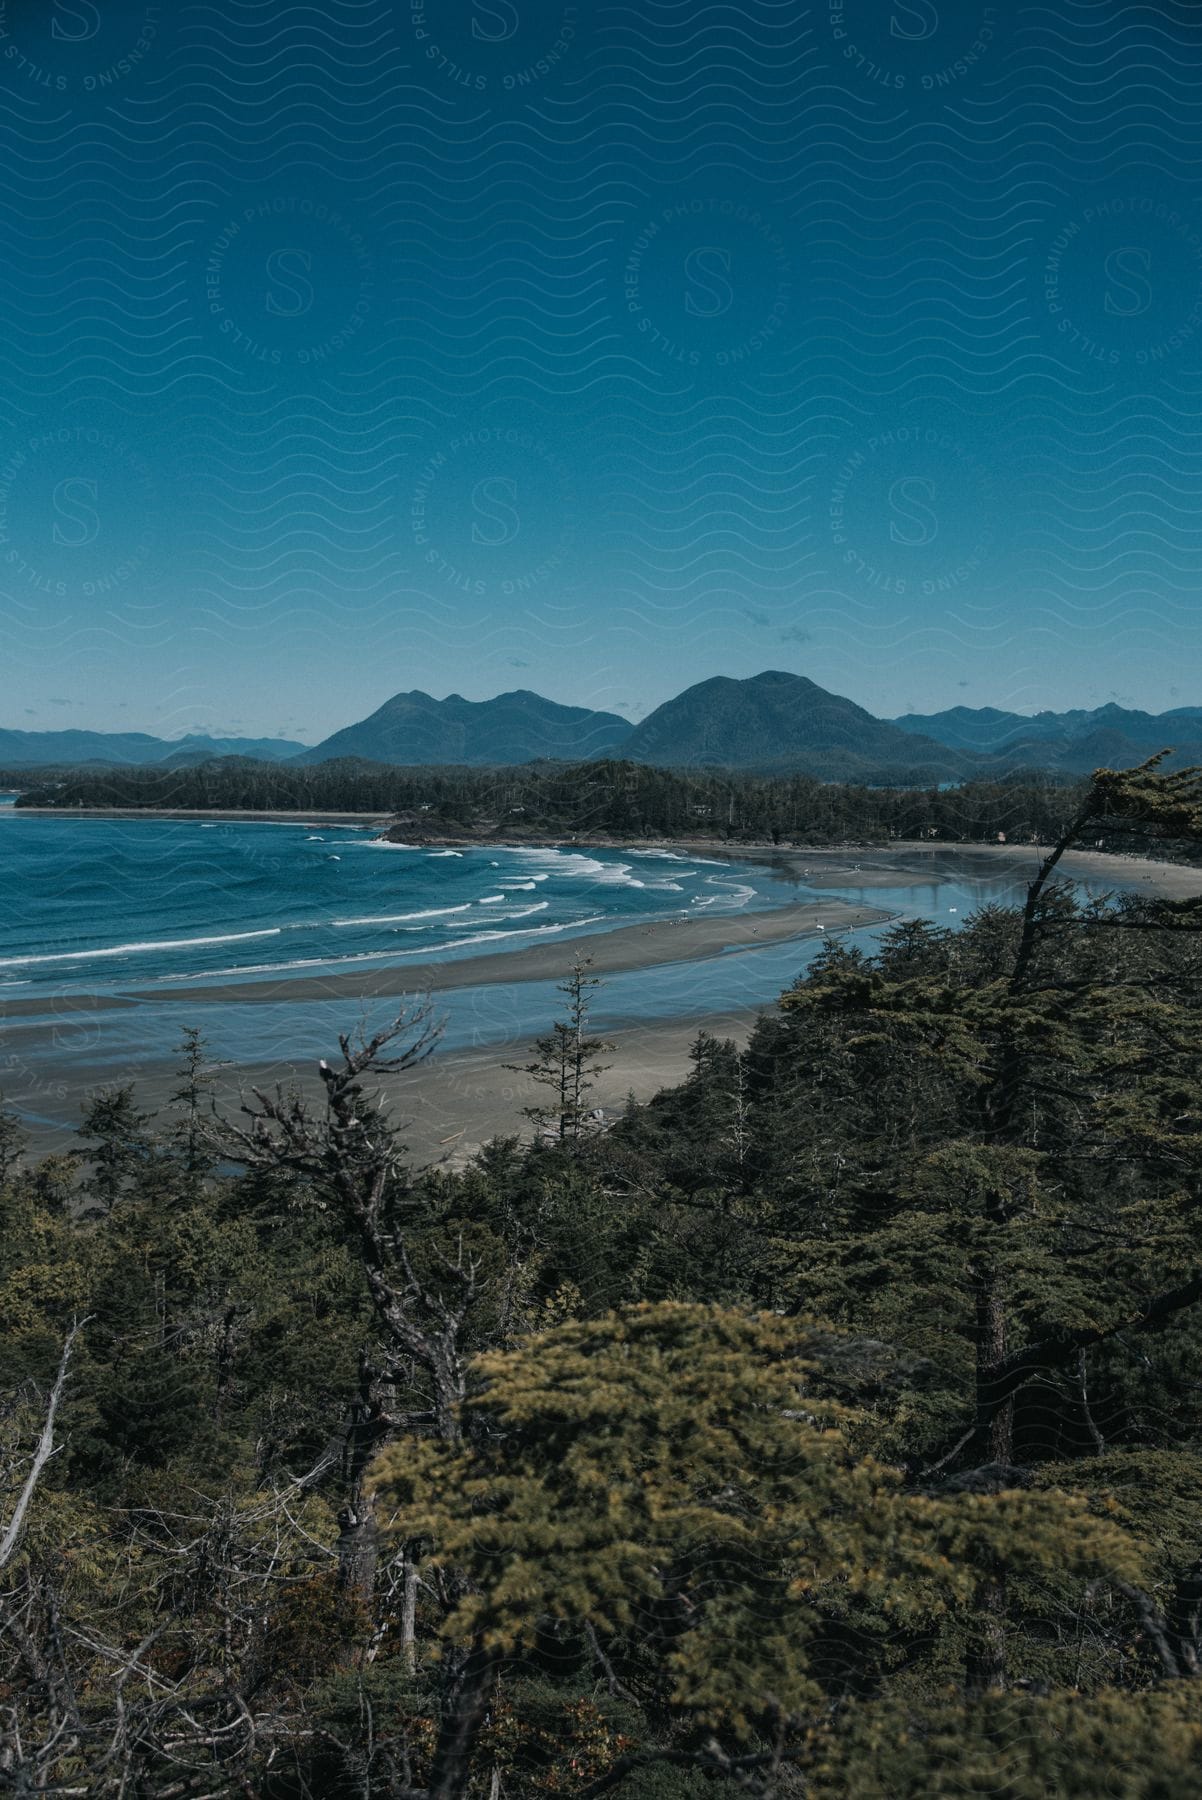 A beach next to the sea surrounded by trees and mountains